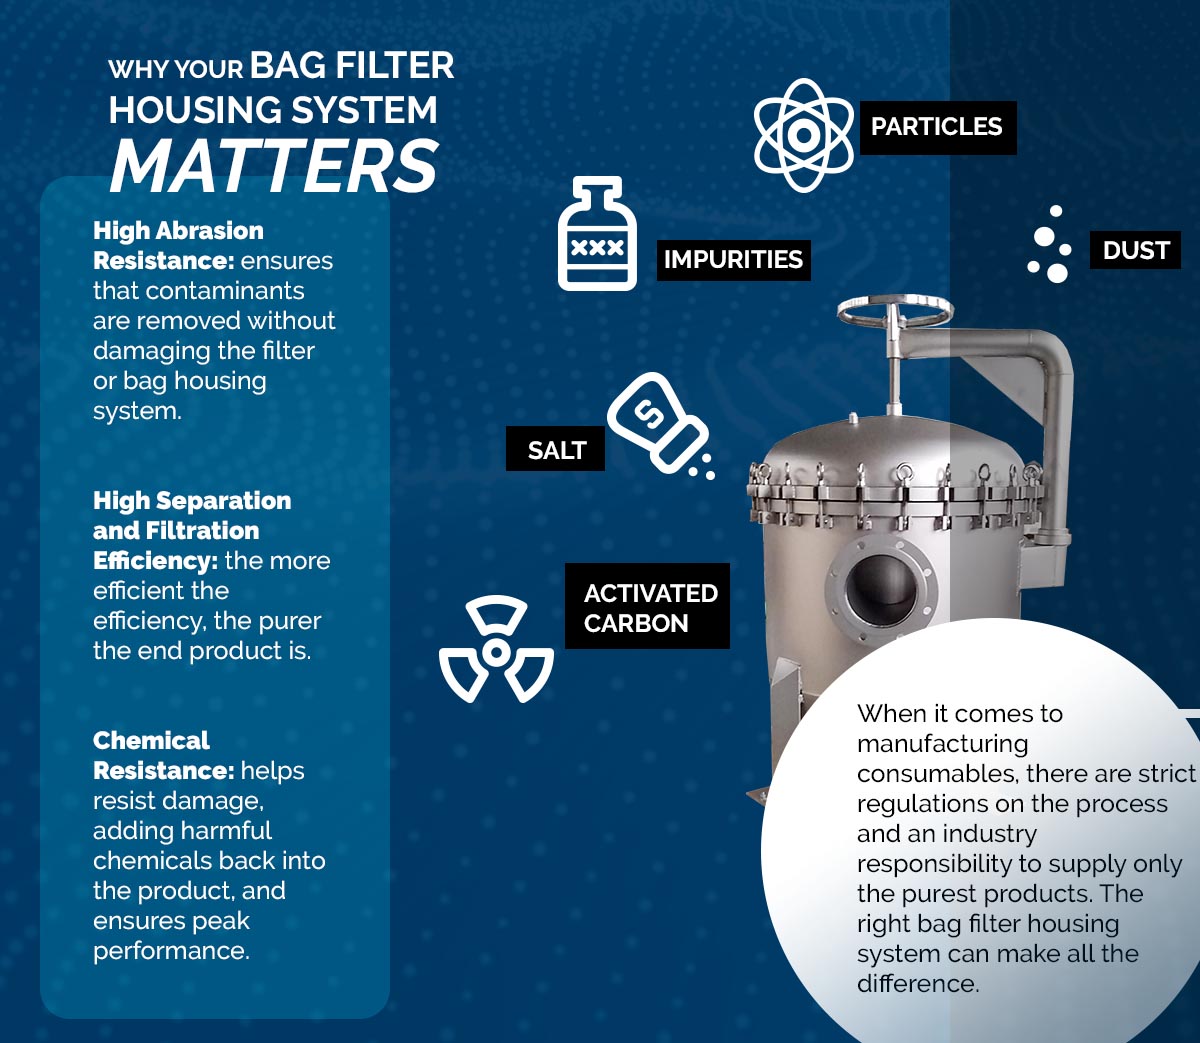 Why-Your-Bag-Filter-Housing-System-Matters-5d2c8b9857e46